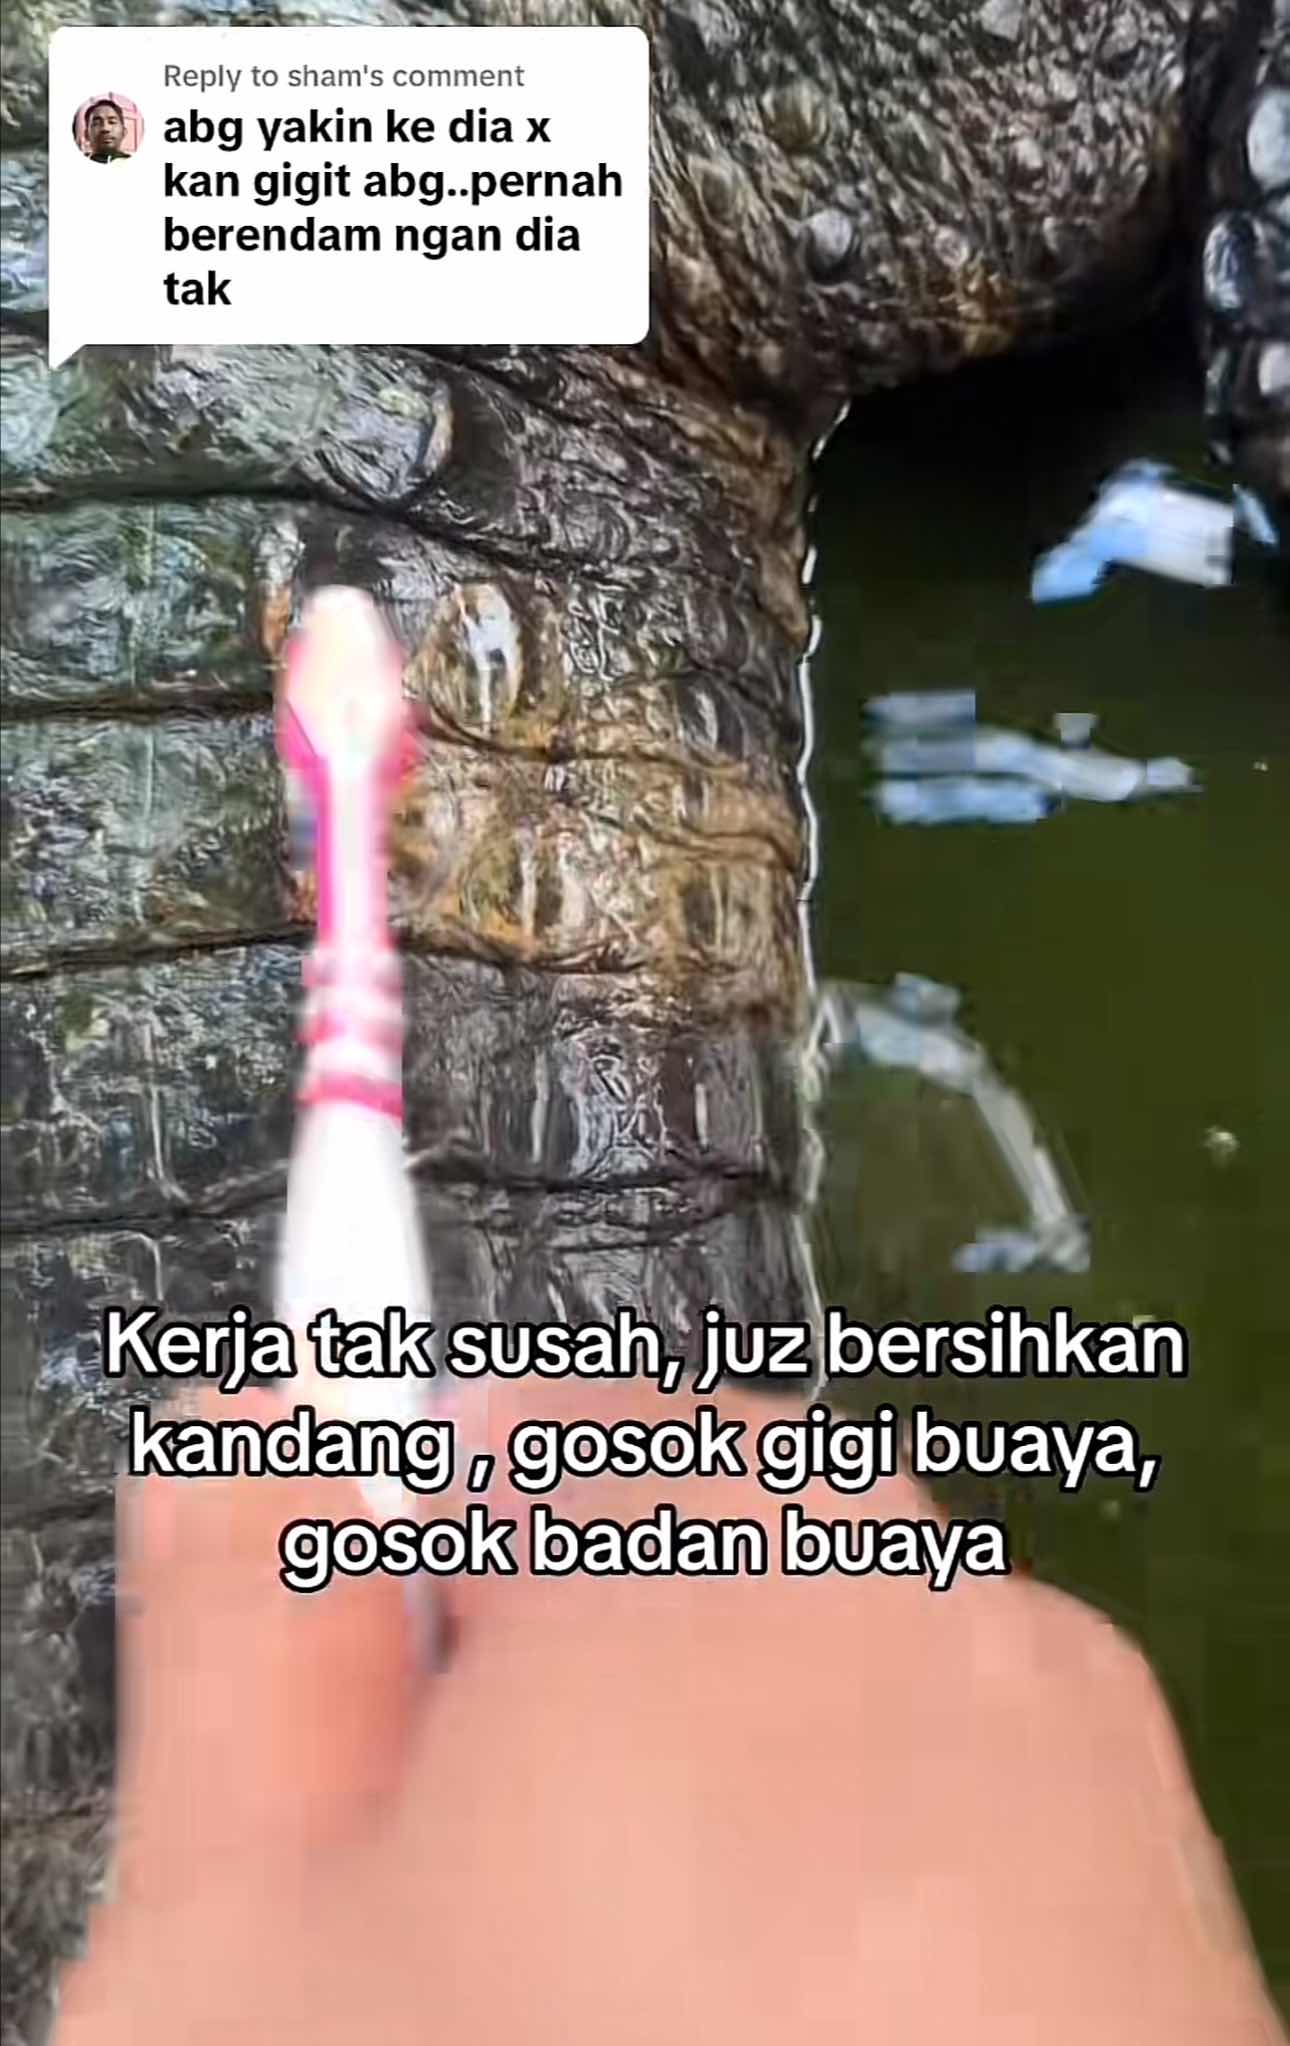 Msian man shows how he brushes his crocodile's back